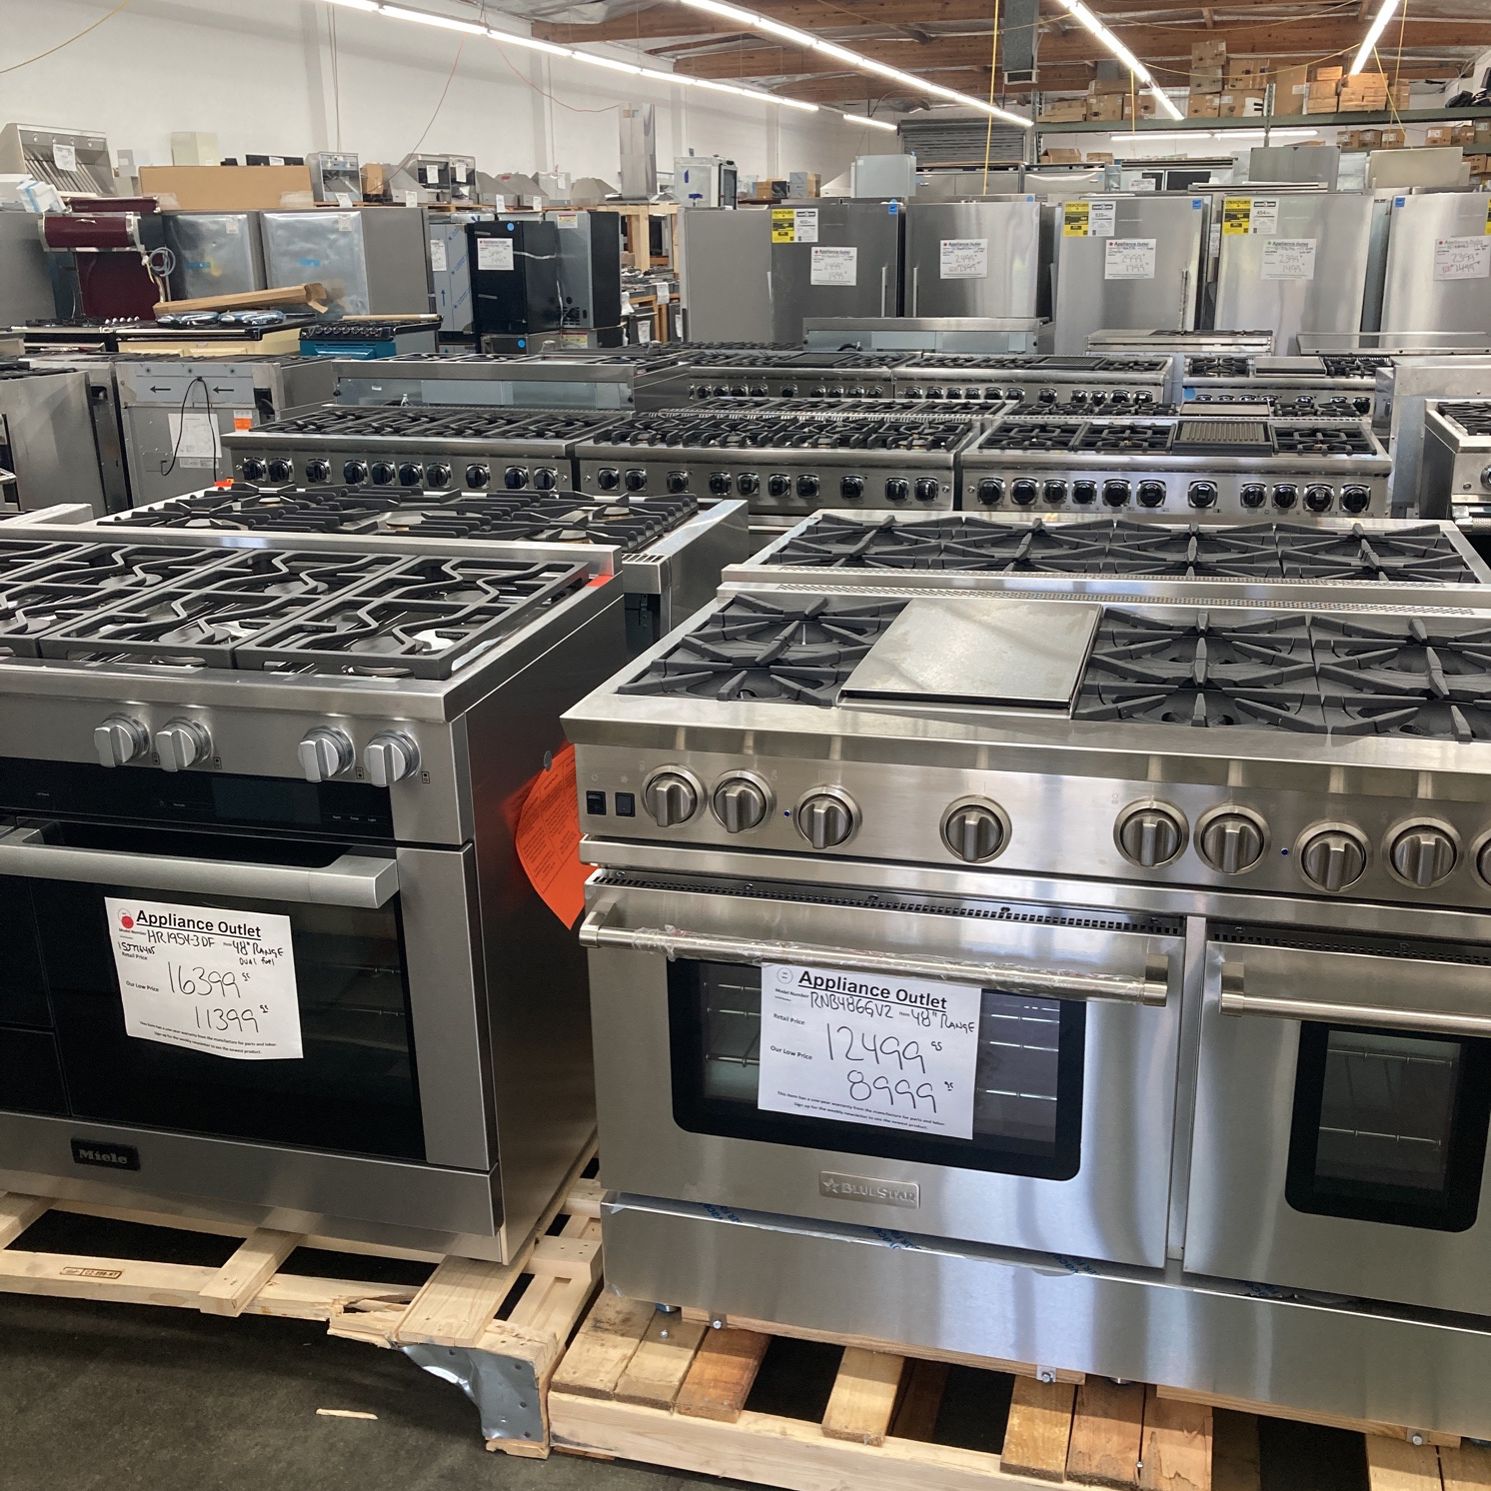 Warehouse Full Of discounted High End Appliances 40% Off Retail